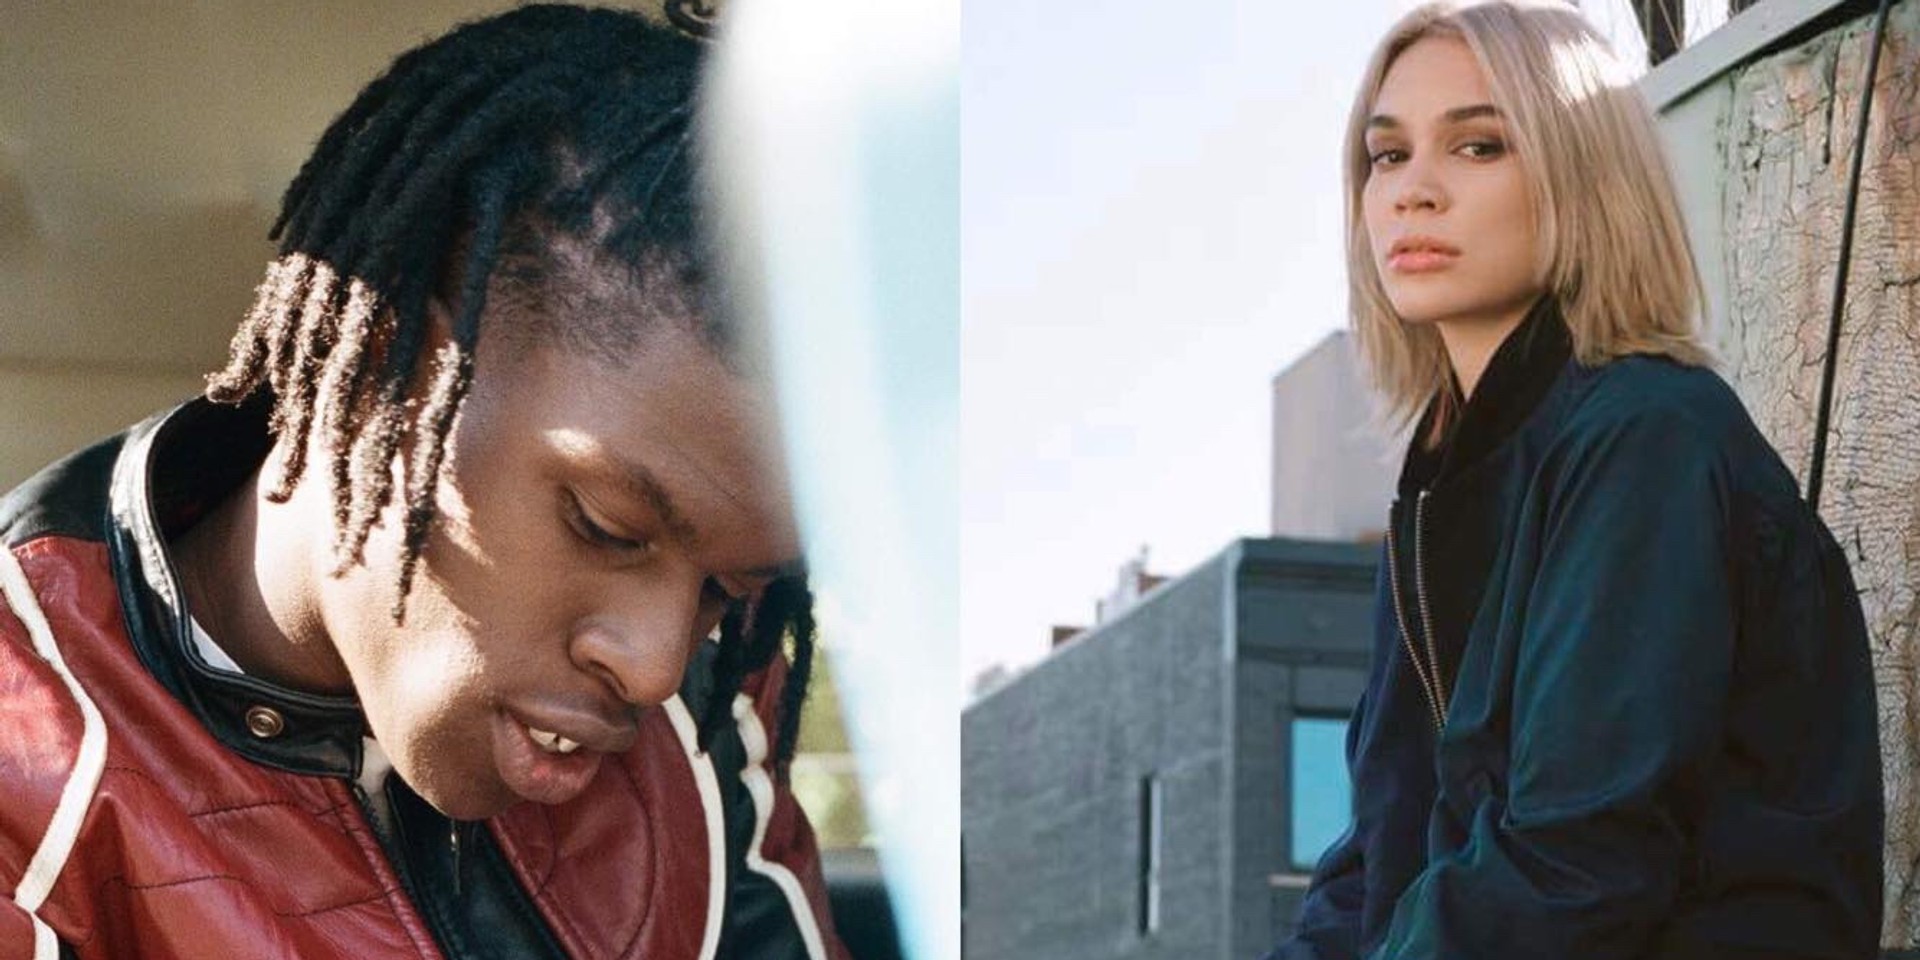 Daniel Caesar and Jess Connelly to join Wanderland 2018